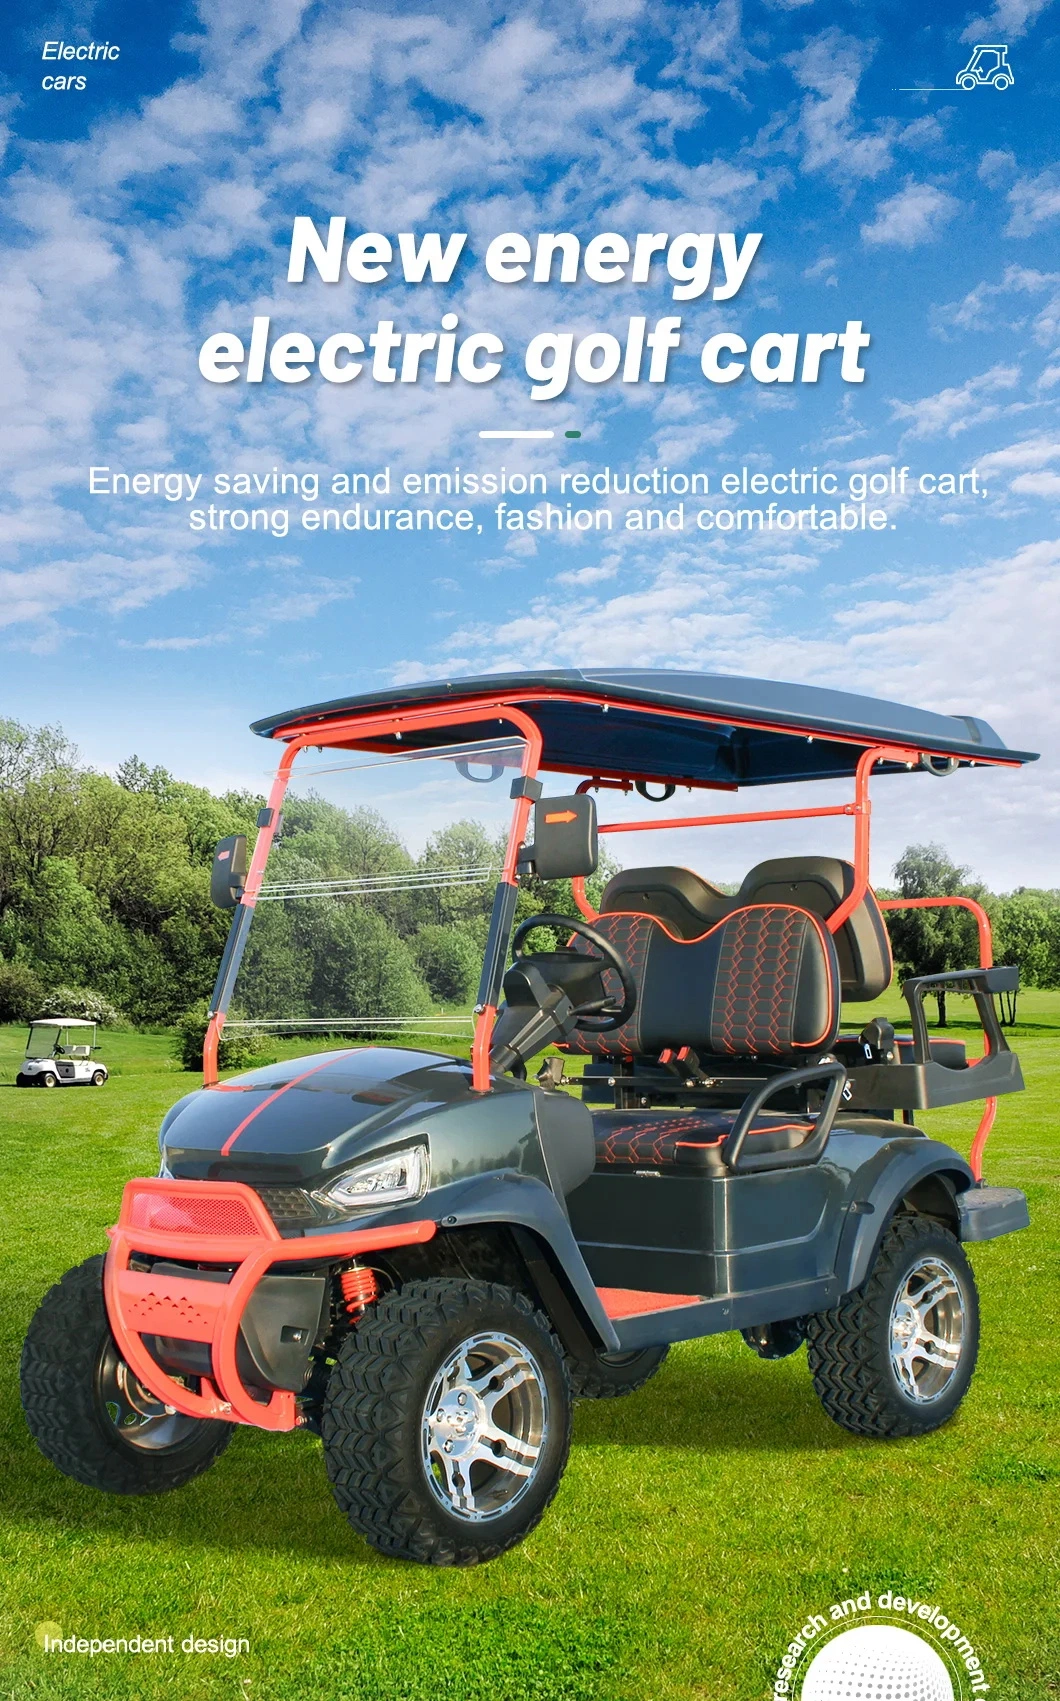 48V Lithium Battery 4 Seater Electric Hunting Lifted Golf Cart Buggy Golf Club Car New Vehicle